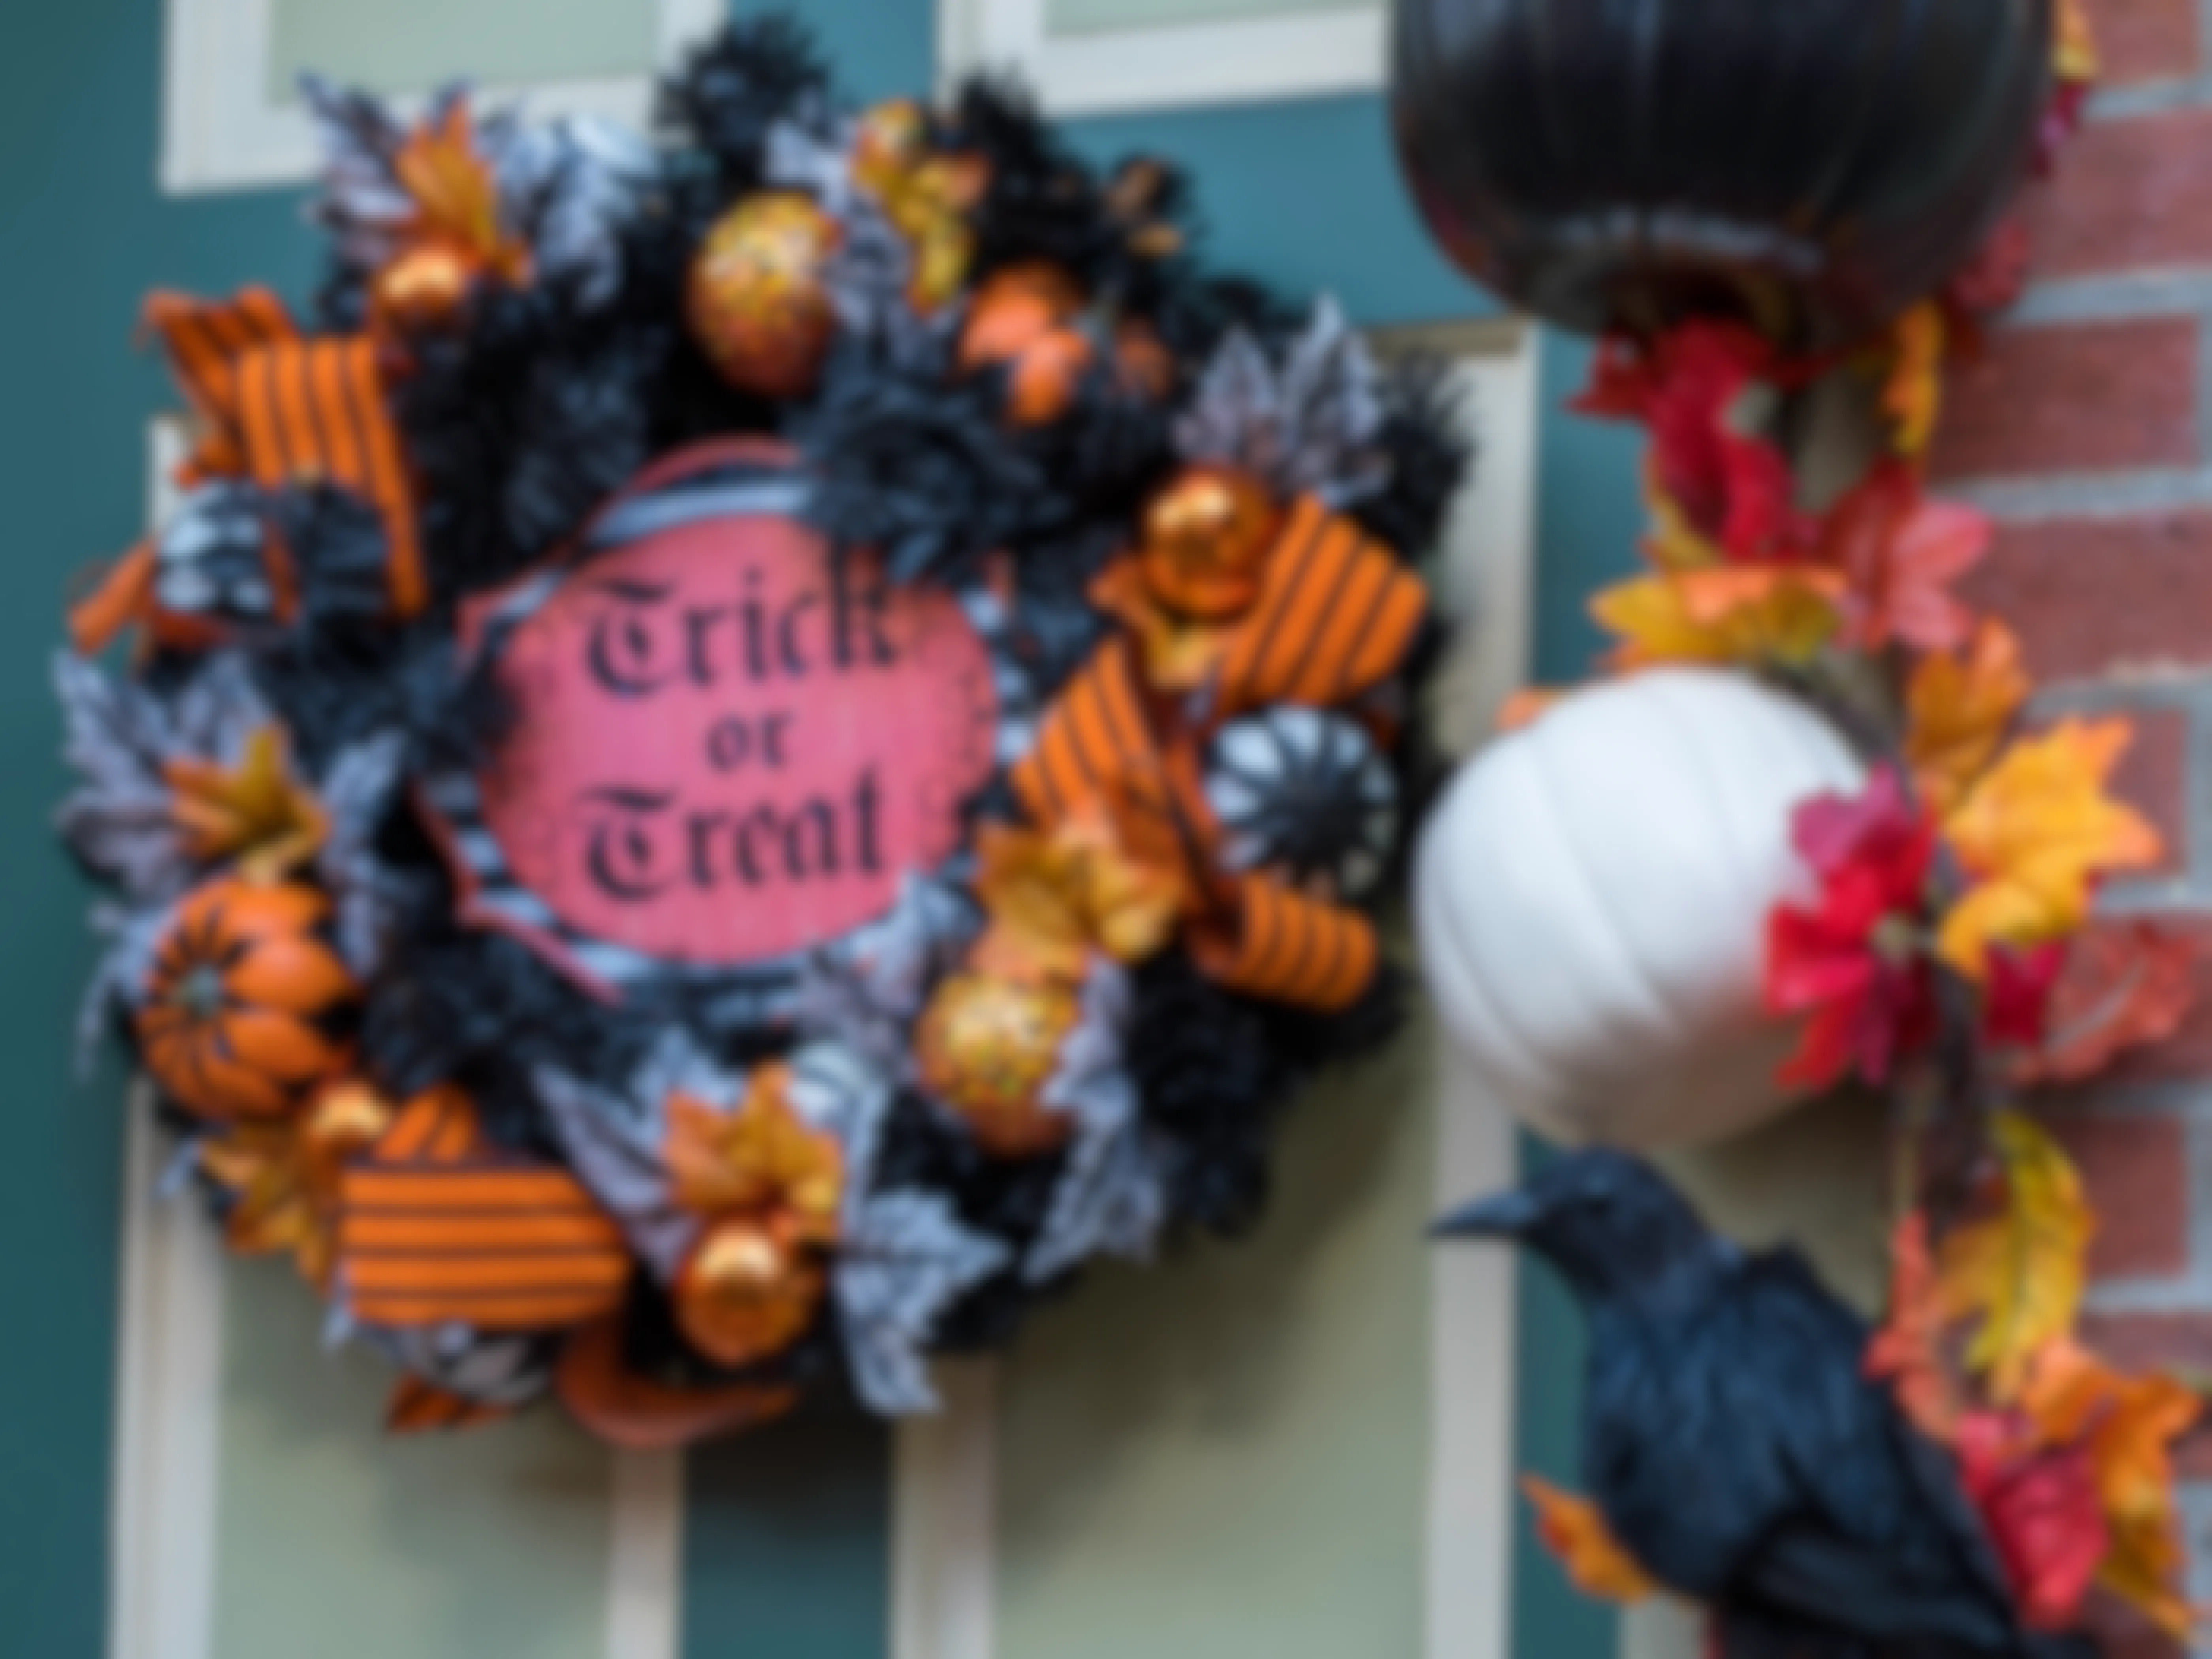 A Trick-or-Treat wreath hung on a front door near other Halloween decorations.